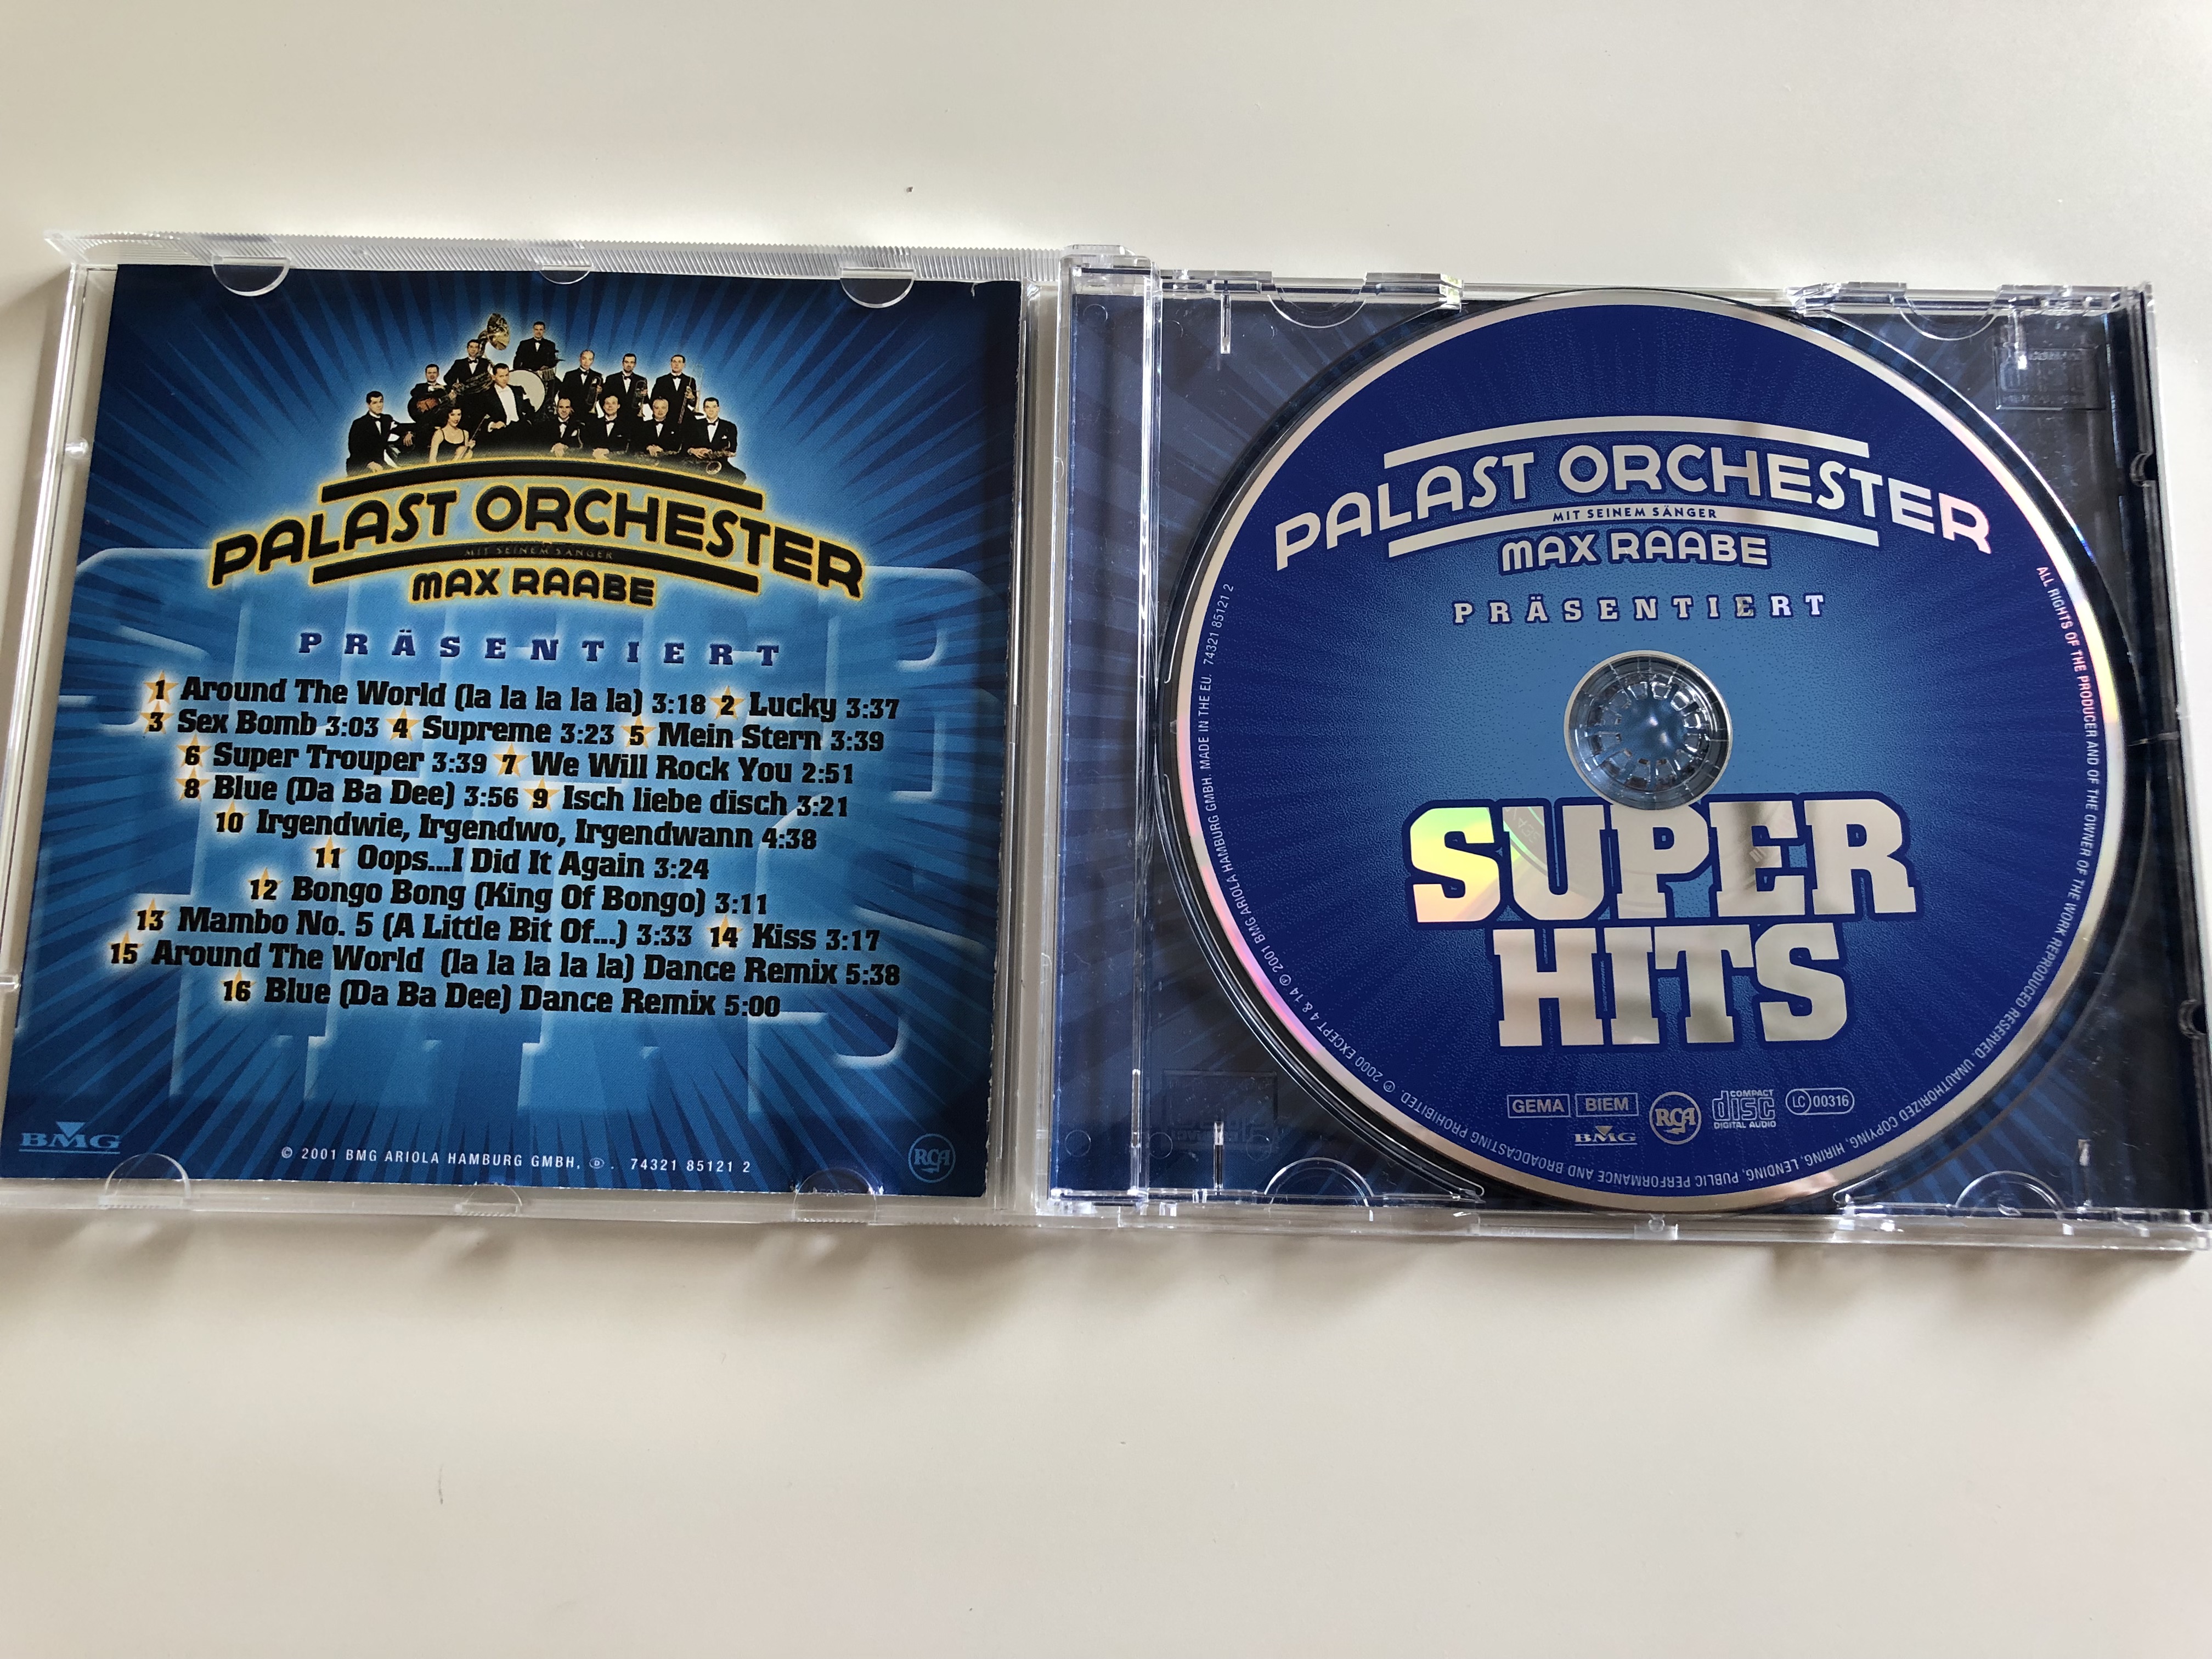 palast-orchester-super-hits-max-raabe-we-will-rock-you-mein-stern-lucky-mambo-nr.-5-supreme-audio-cd-2001-3-.jpg